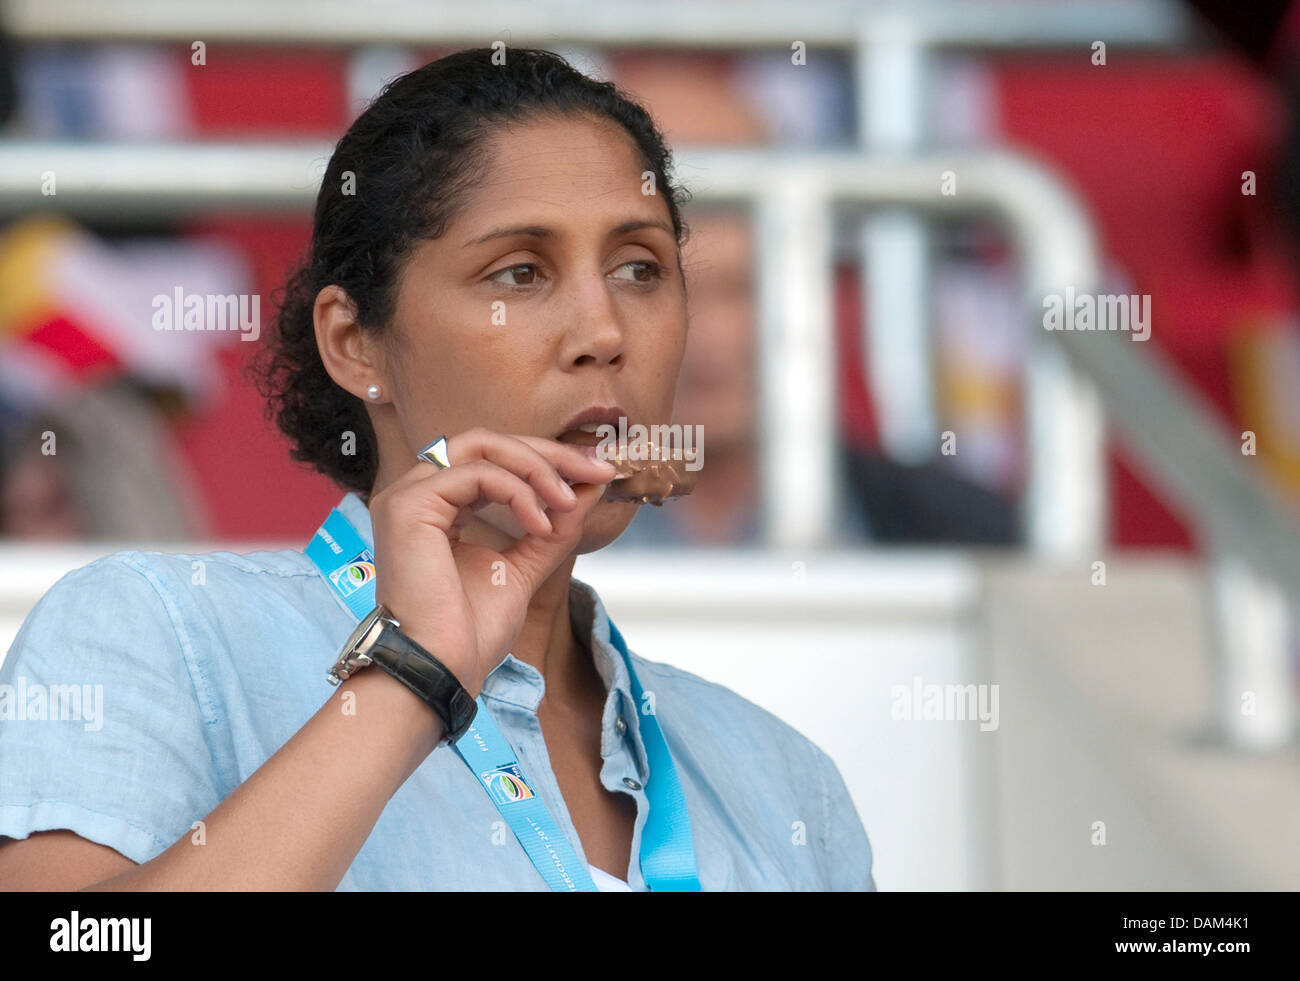 Steffi Jones, predsident of the organisation committee for the Women's World Cup 2011 and former soccer player, eats an ice-cream during the soccer friendly match Germany vs. North Korea in Ingolstadt, Germany, 21 May 2011. Photo: Andreas Gebert Stock Photo